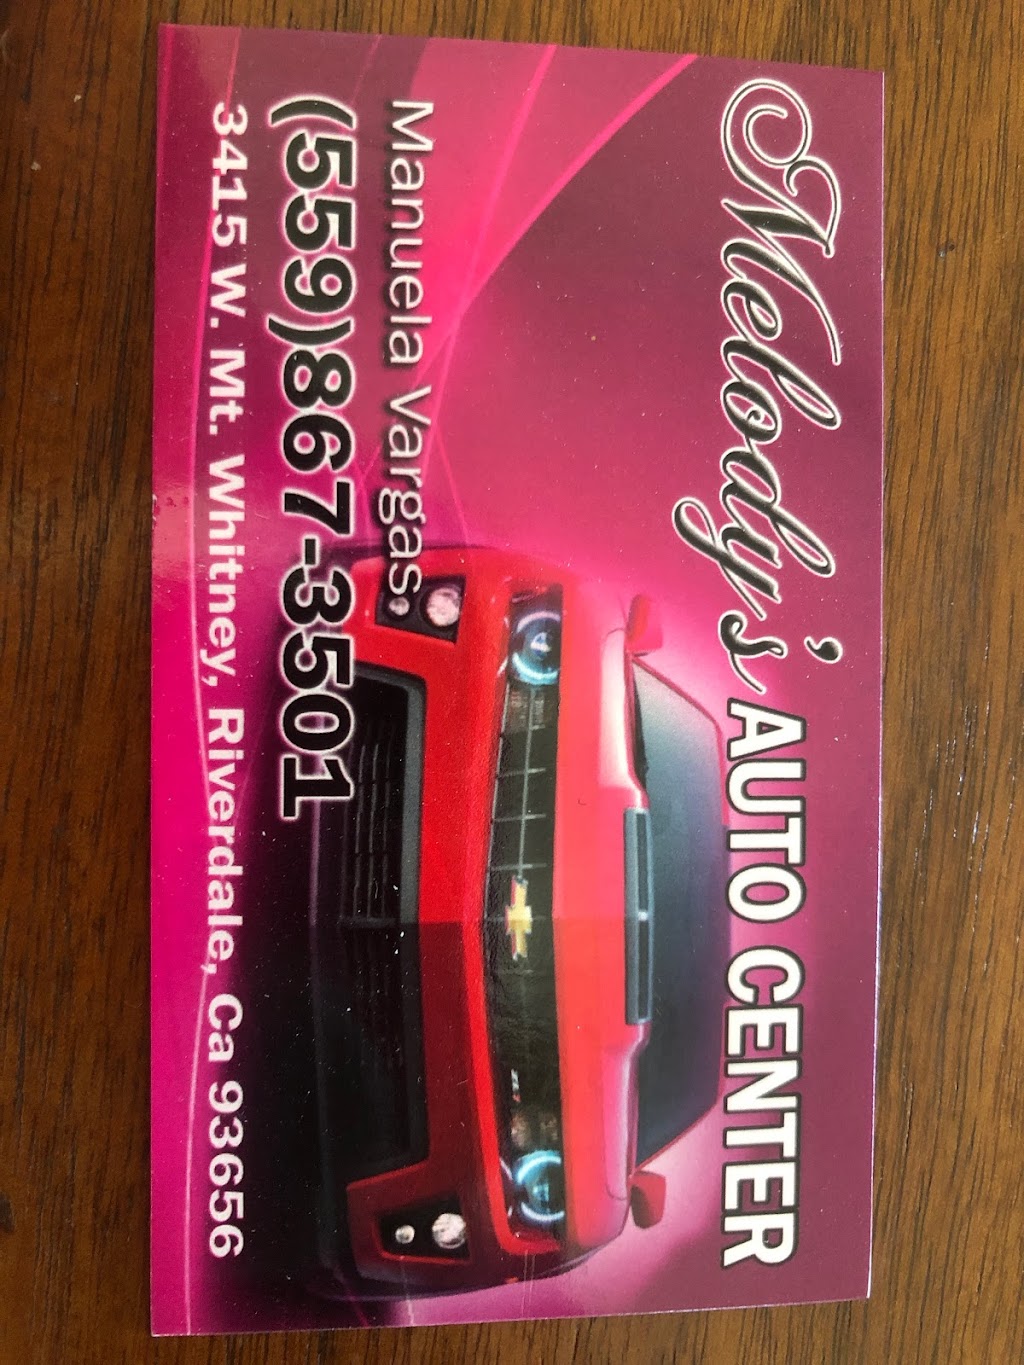 Melody’s Auto Center | 3415 W Mt Whitney Ave, Riverdale, CA 93656, USA | Phone: (559) 867-3501